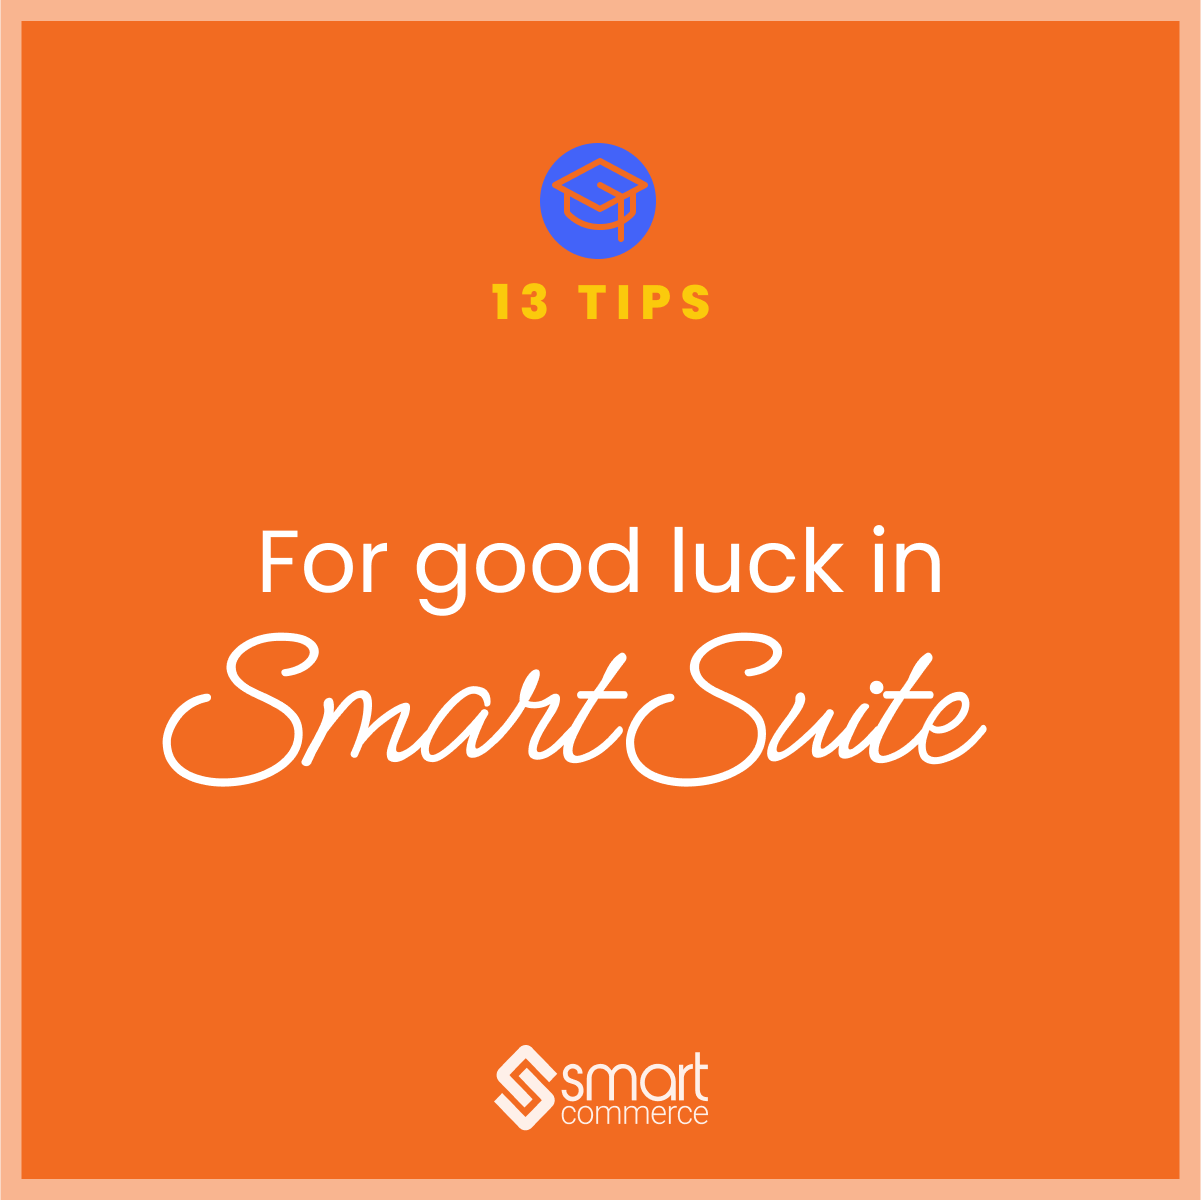 Cover Image for 13 Tips For Getting The Most Out of SmartSuite